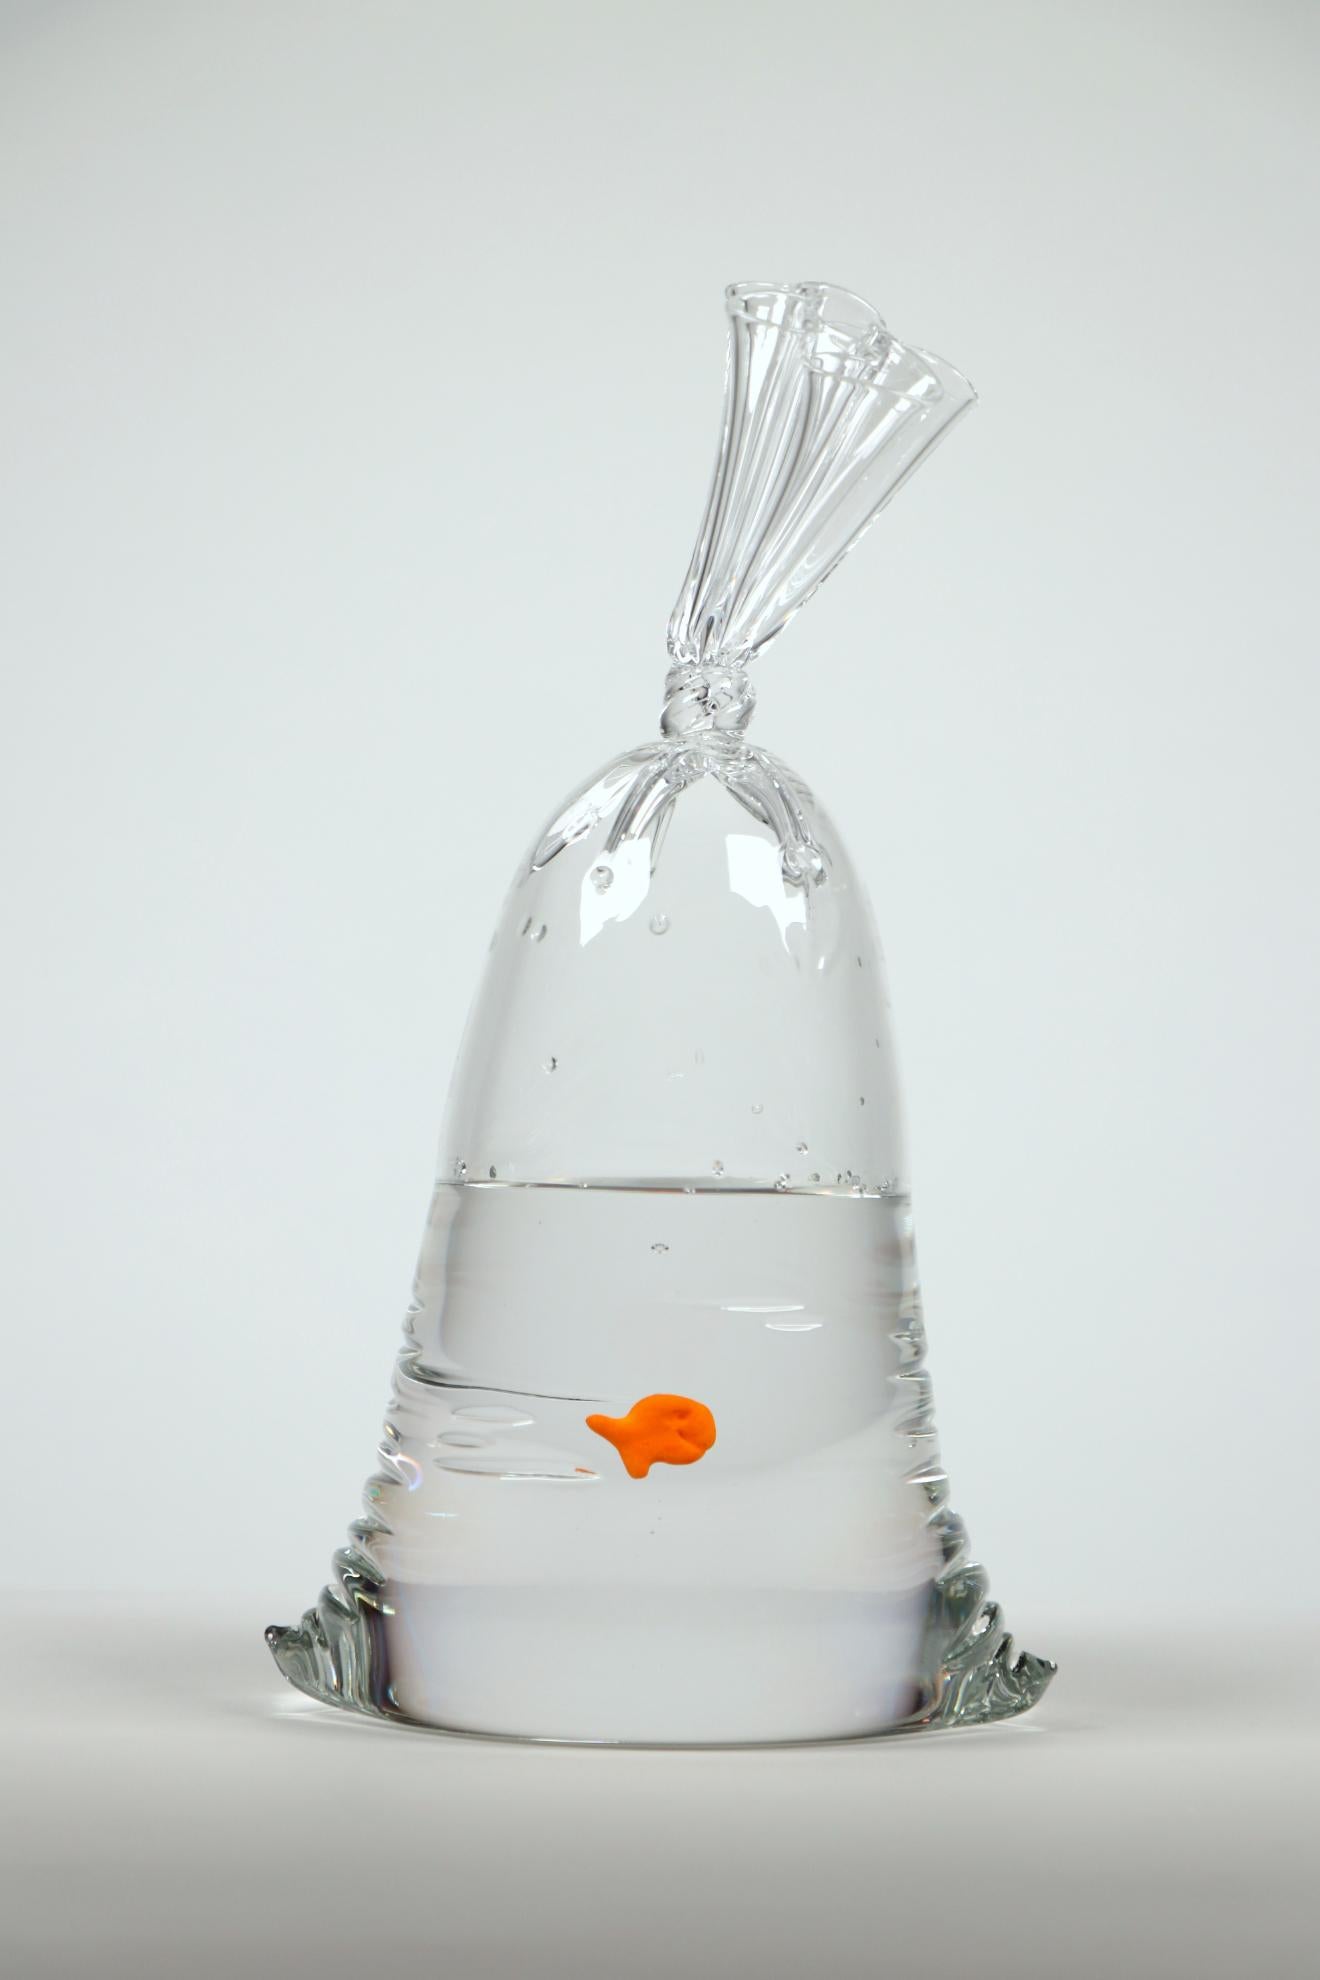 Limited Edition Glass Goldfish Water Bag Sculpture